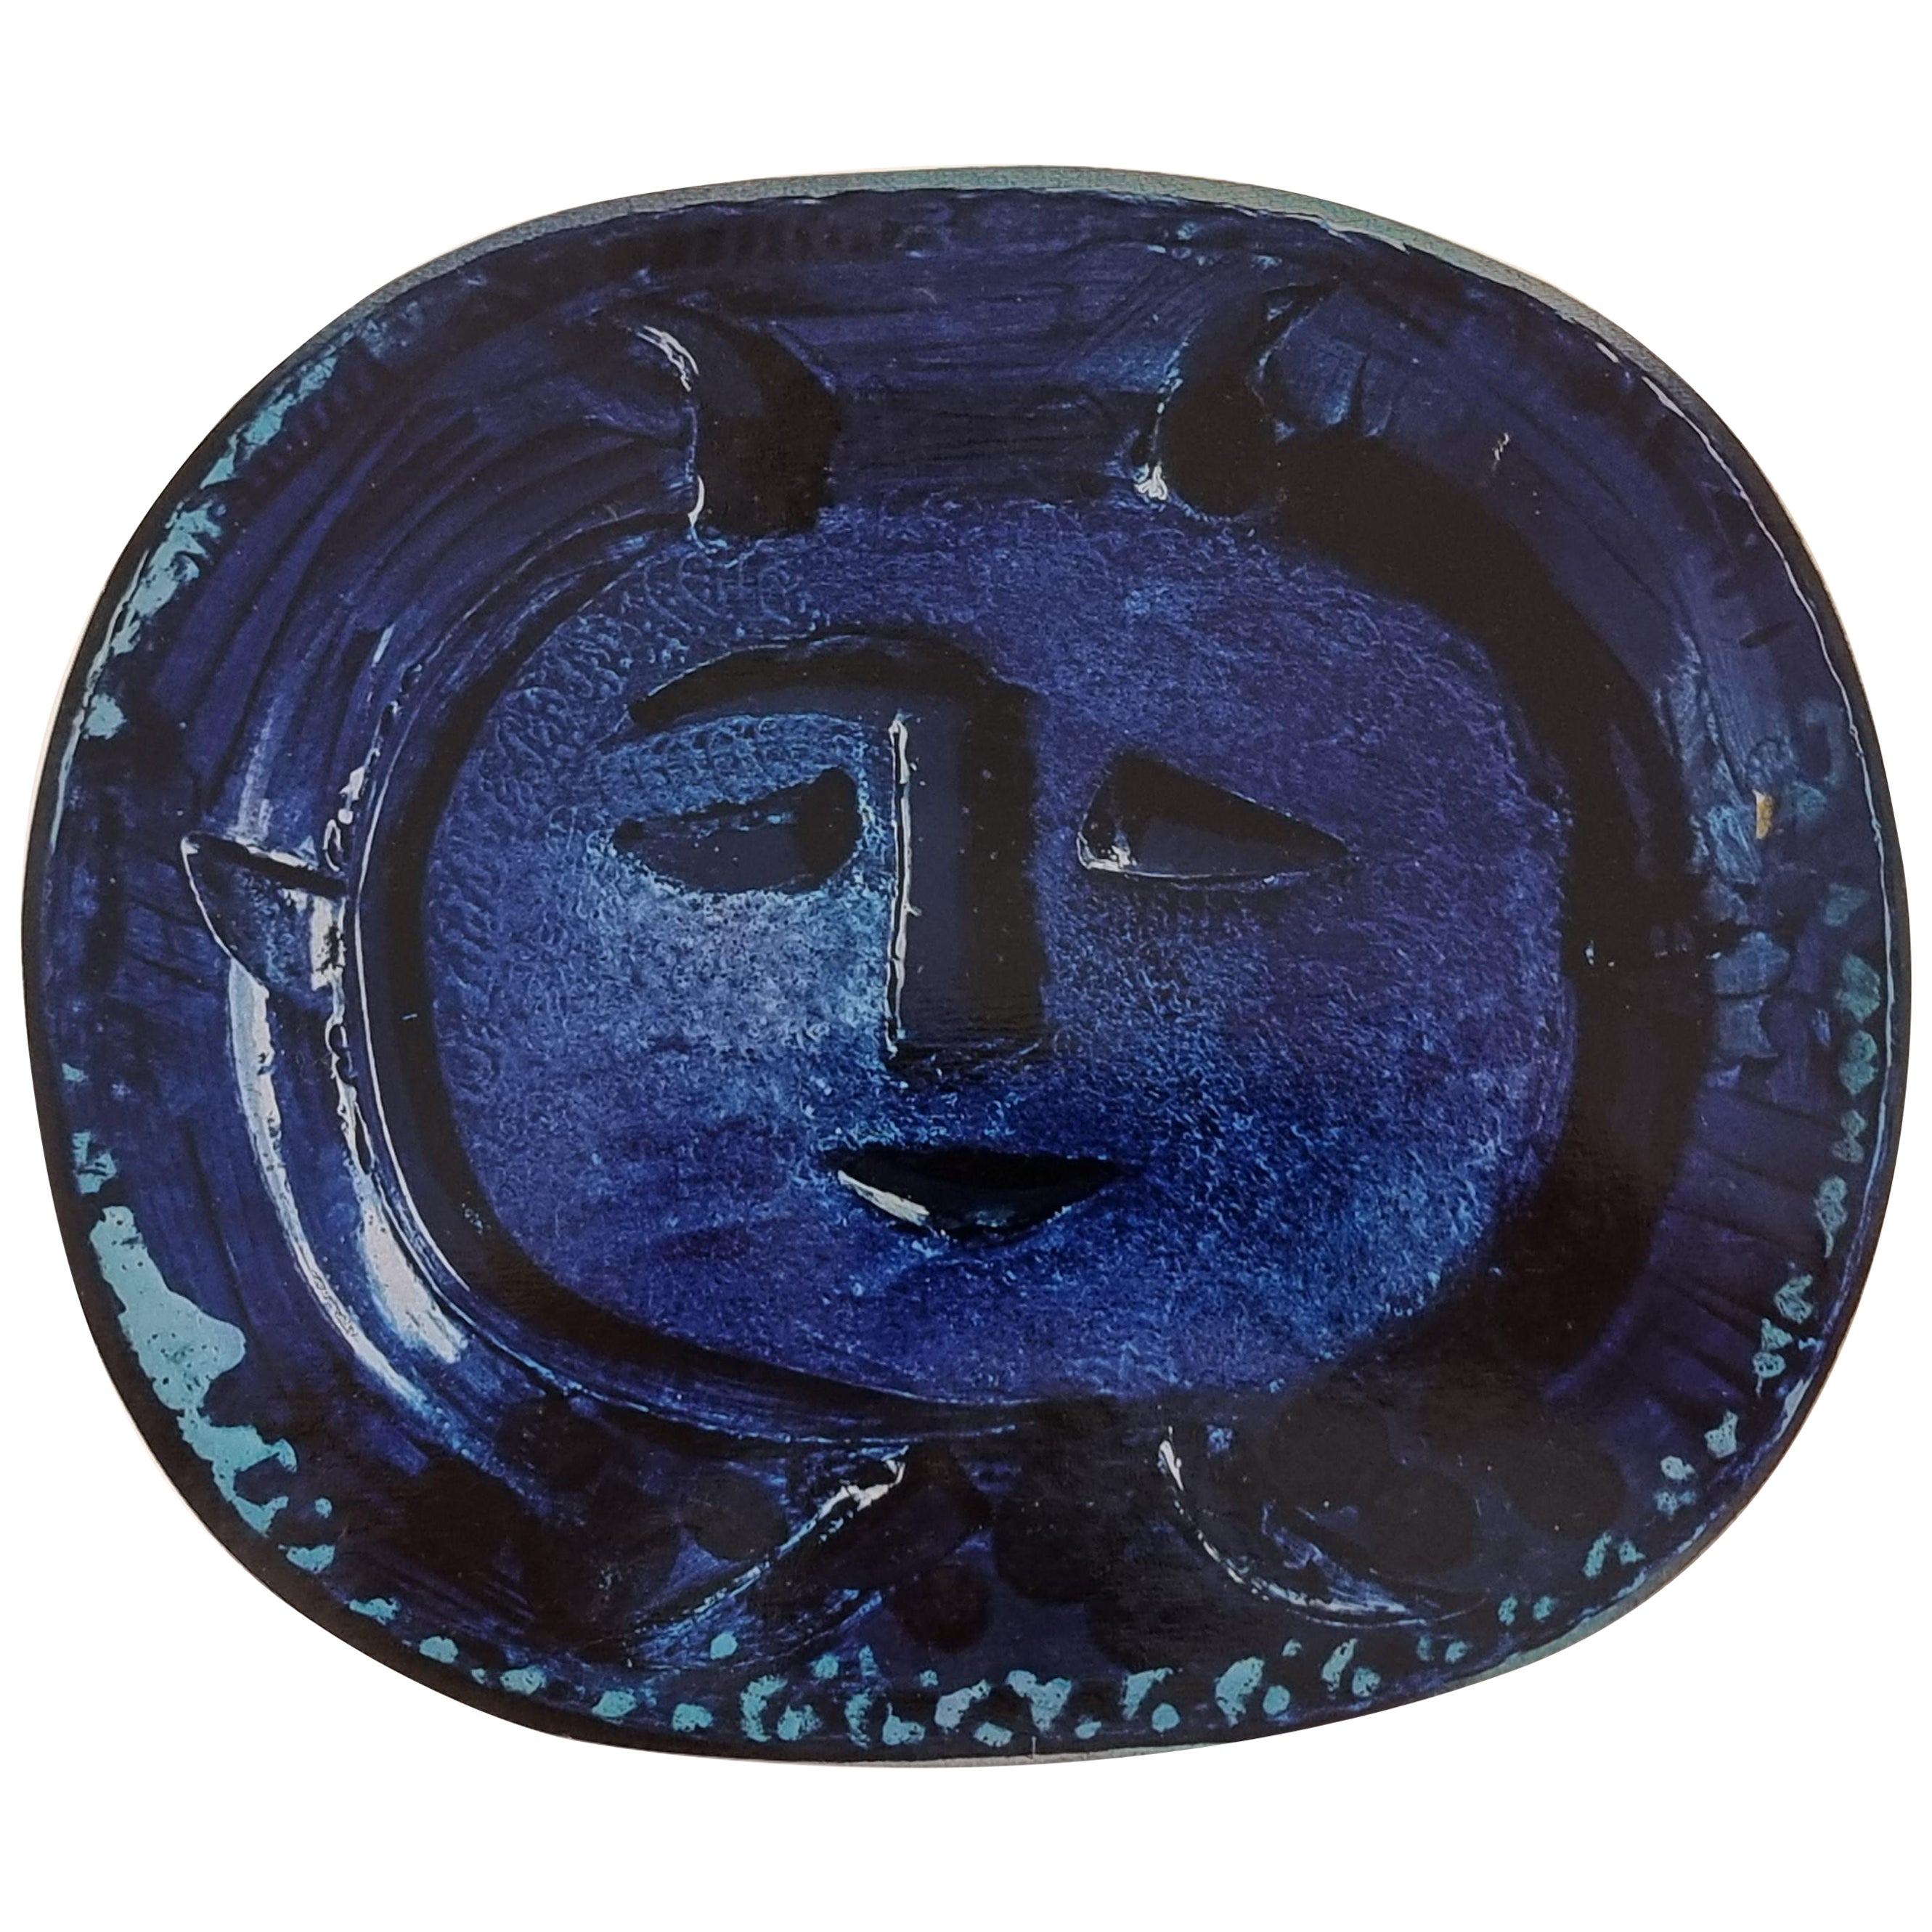 Albert Skira Print of Face in Blue, Ceramic Plate from "Céramiques De Picasso" 